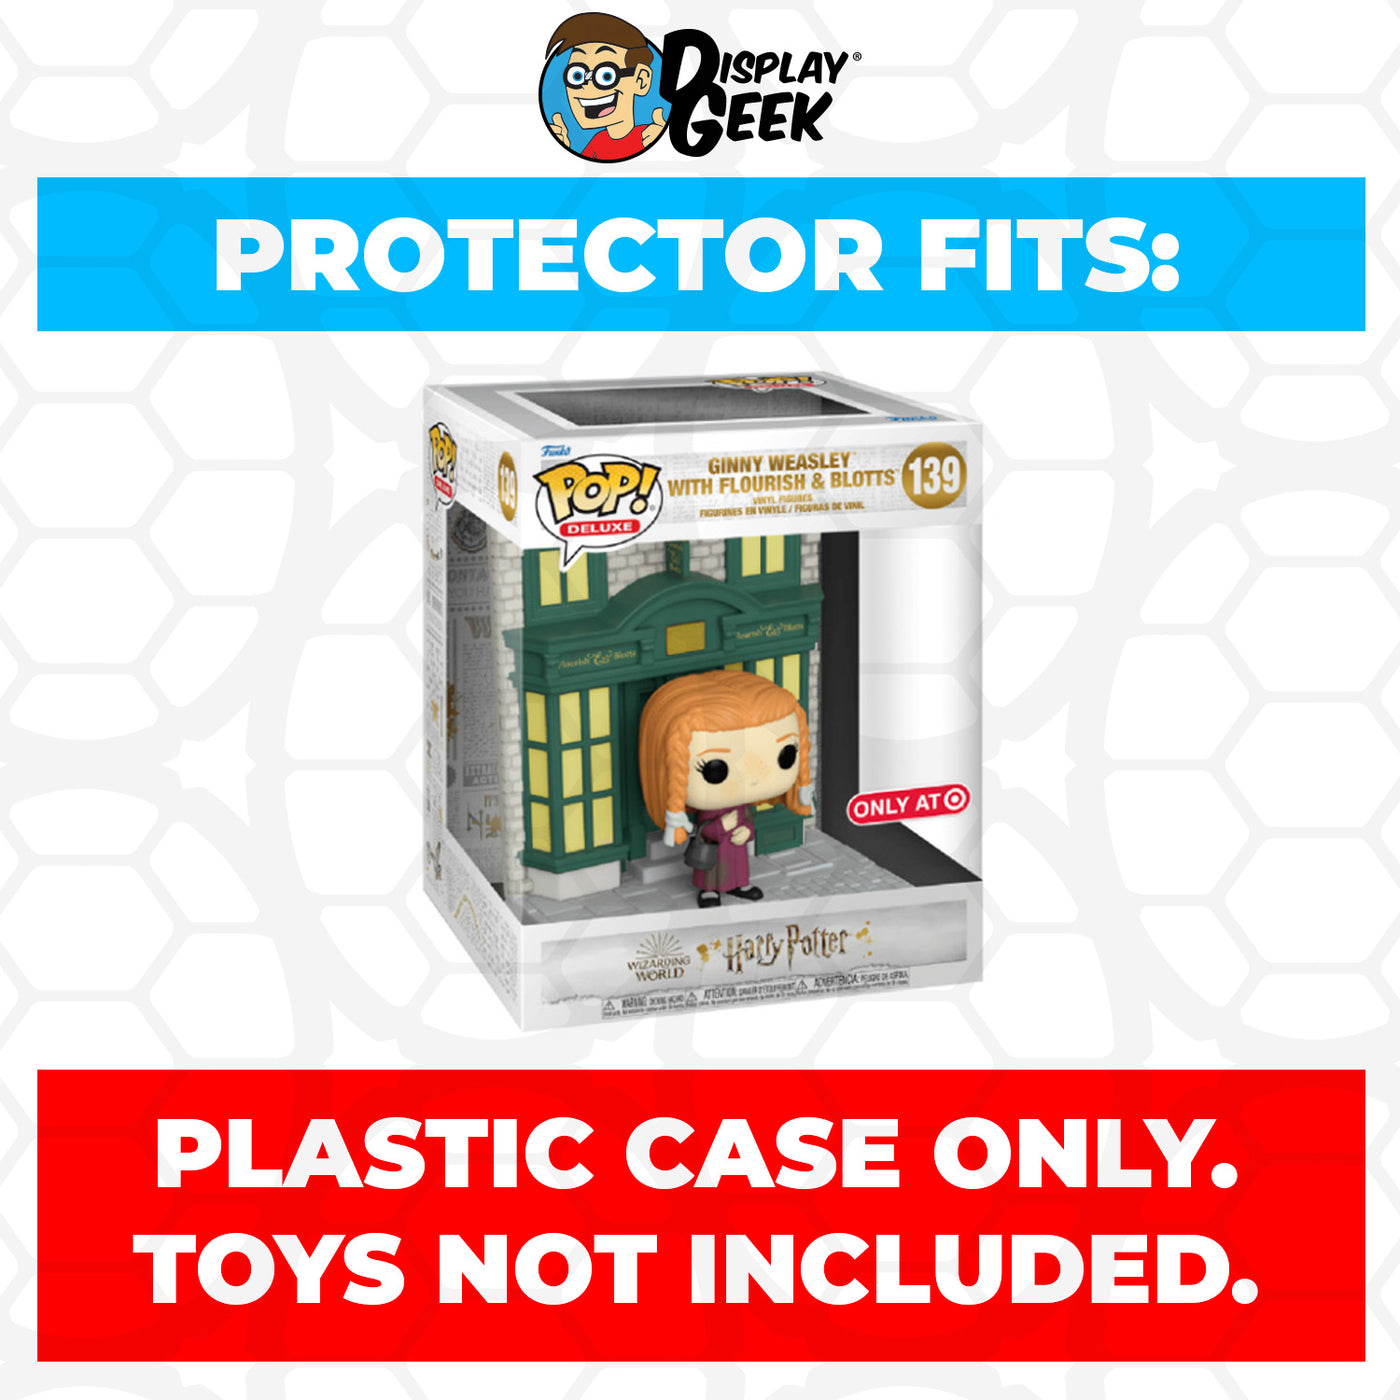 Pop Protector for Ginny Weasley with Flourish & Blotts #139 Funko Pop Deluxe on The Protector Guide App by Display Geek